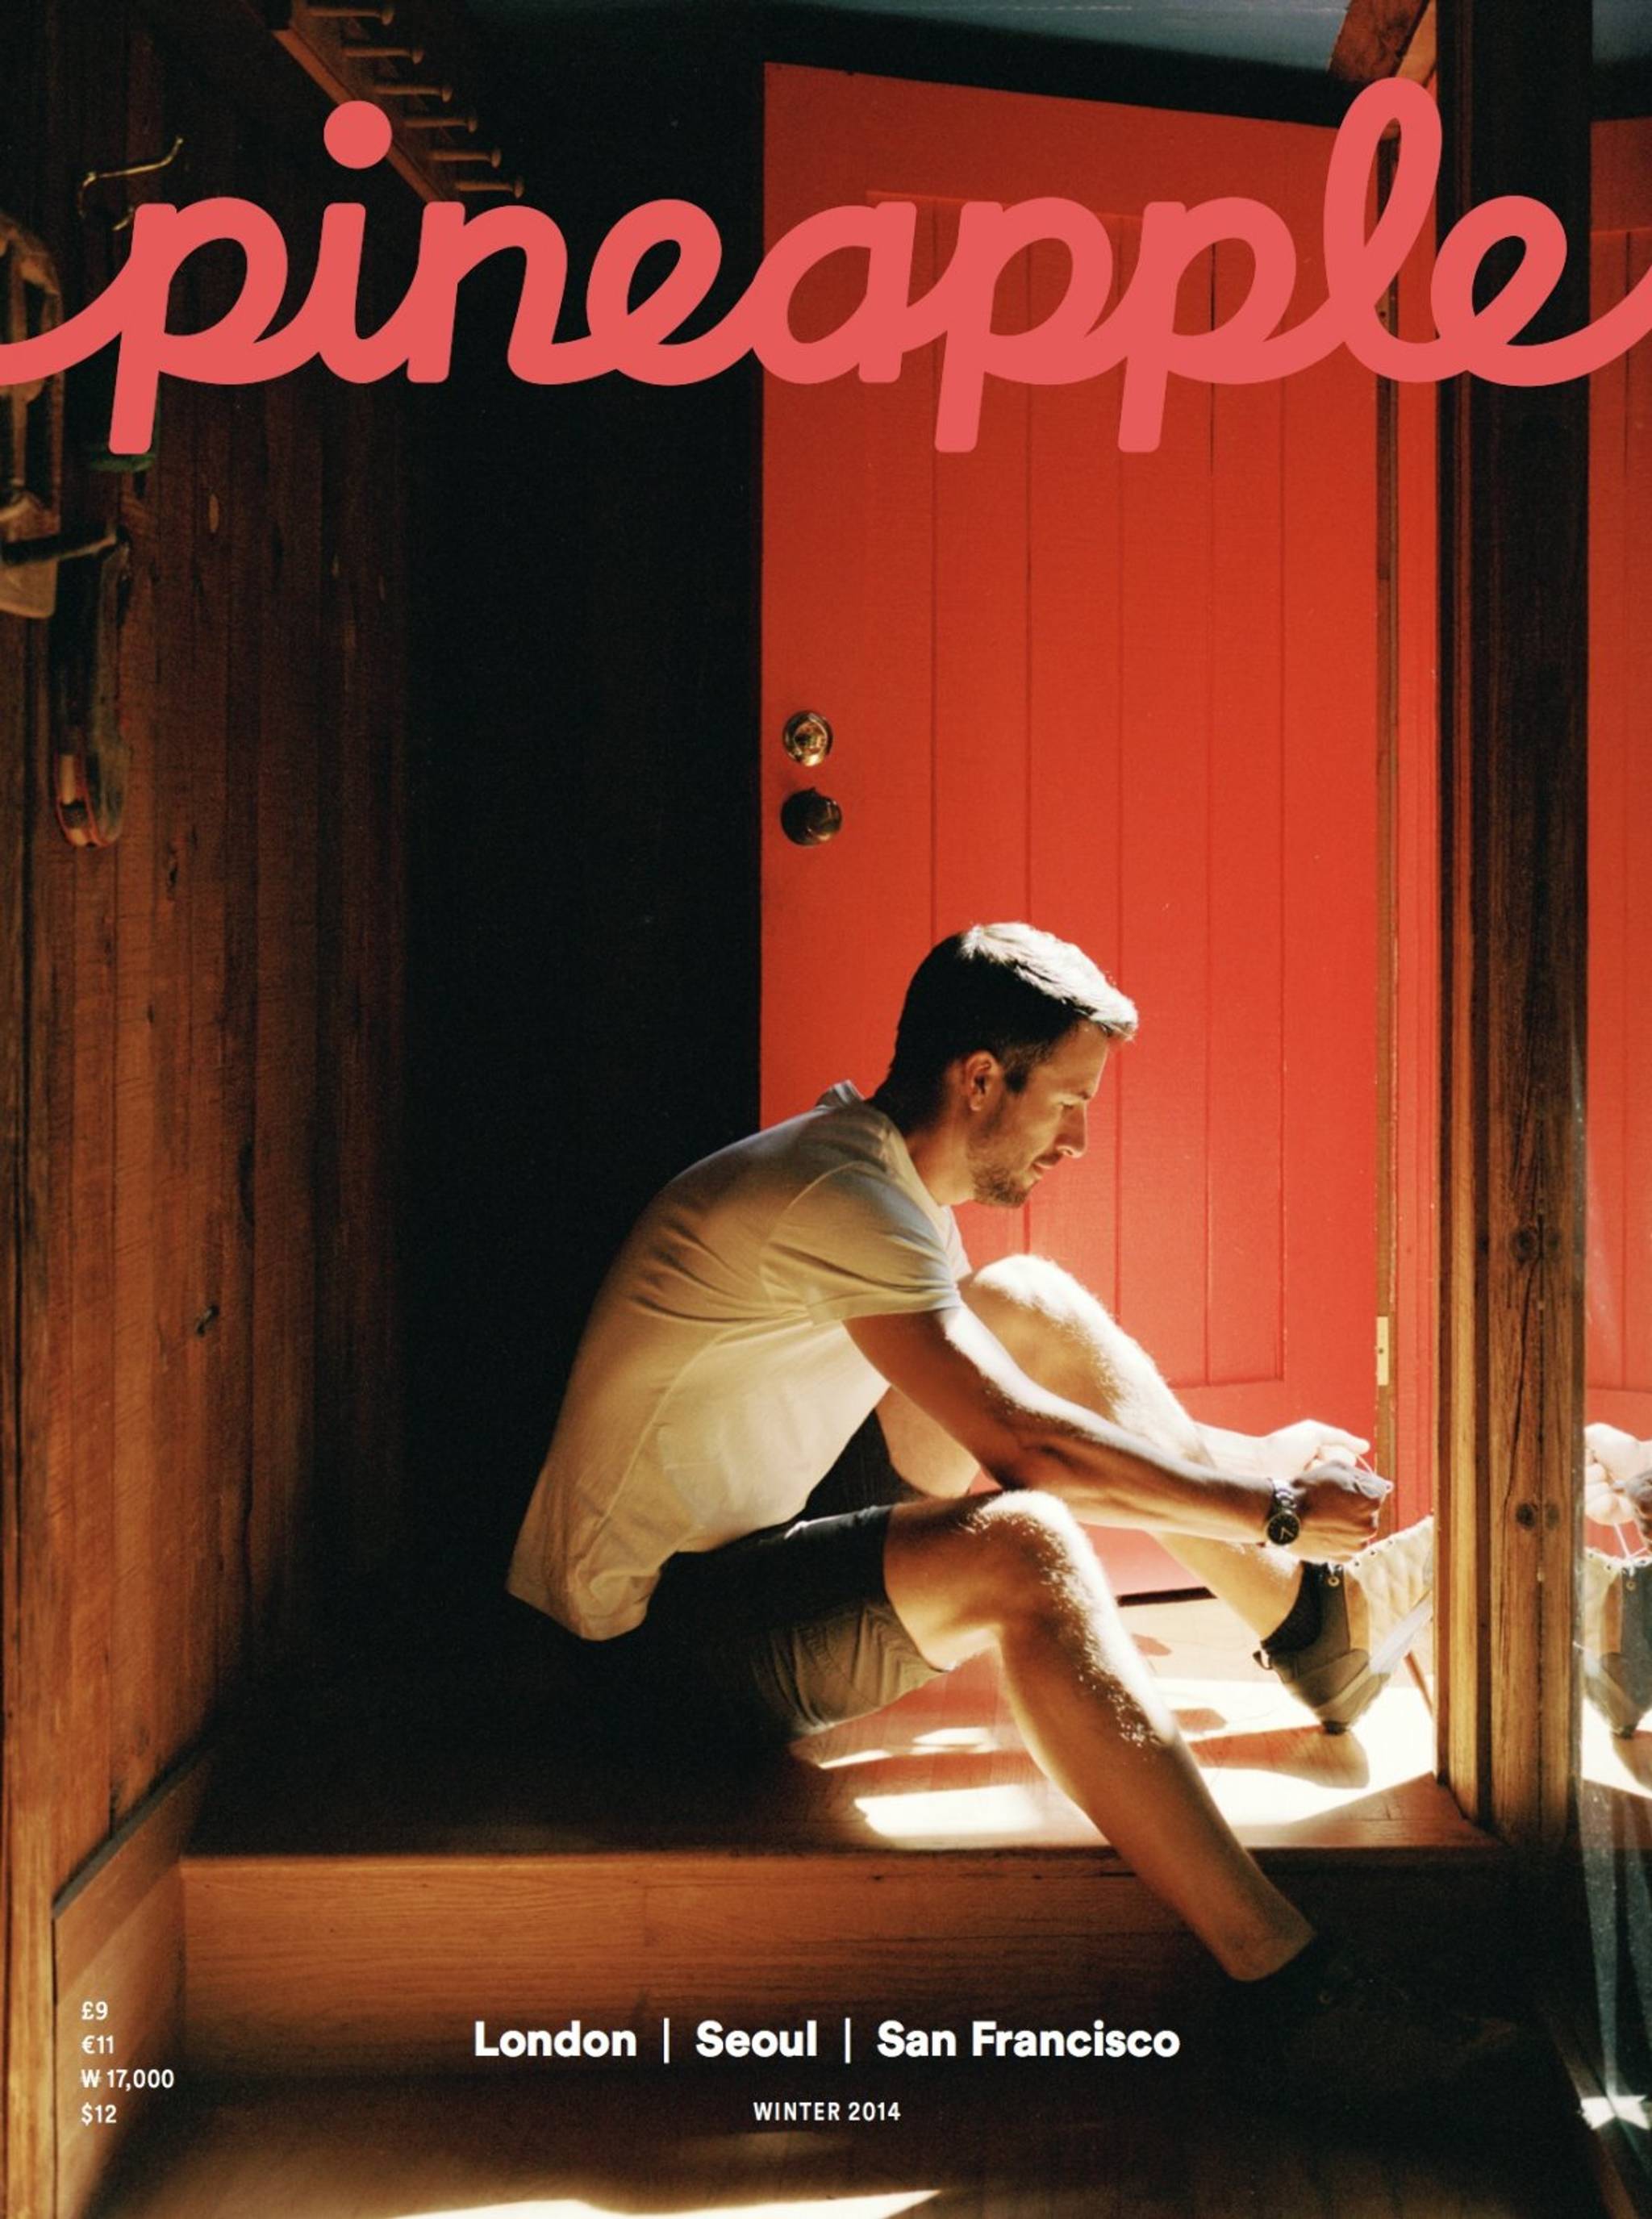 A glossy magazine for Airbnb guests